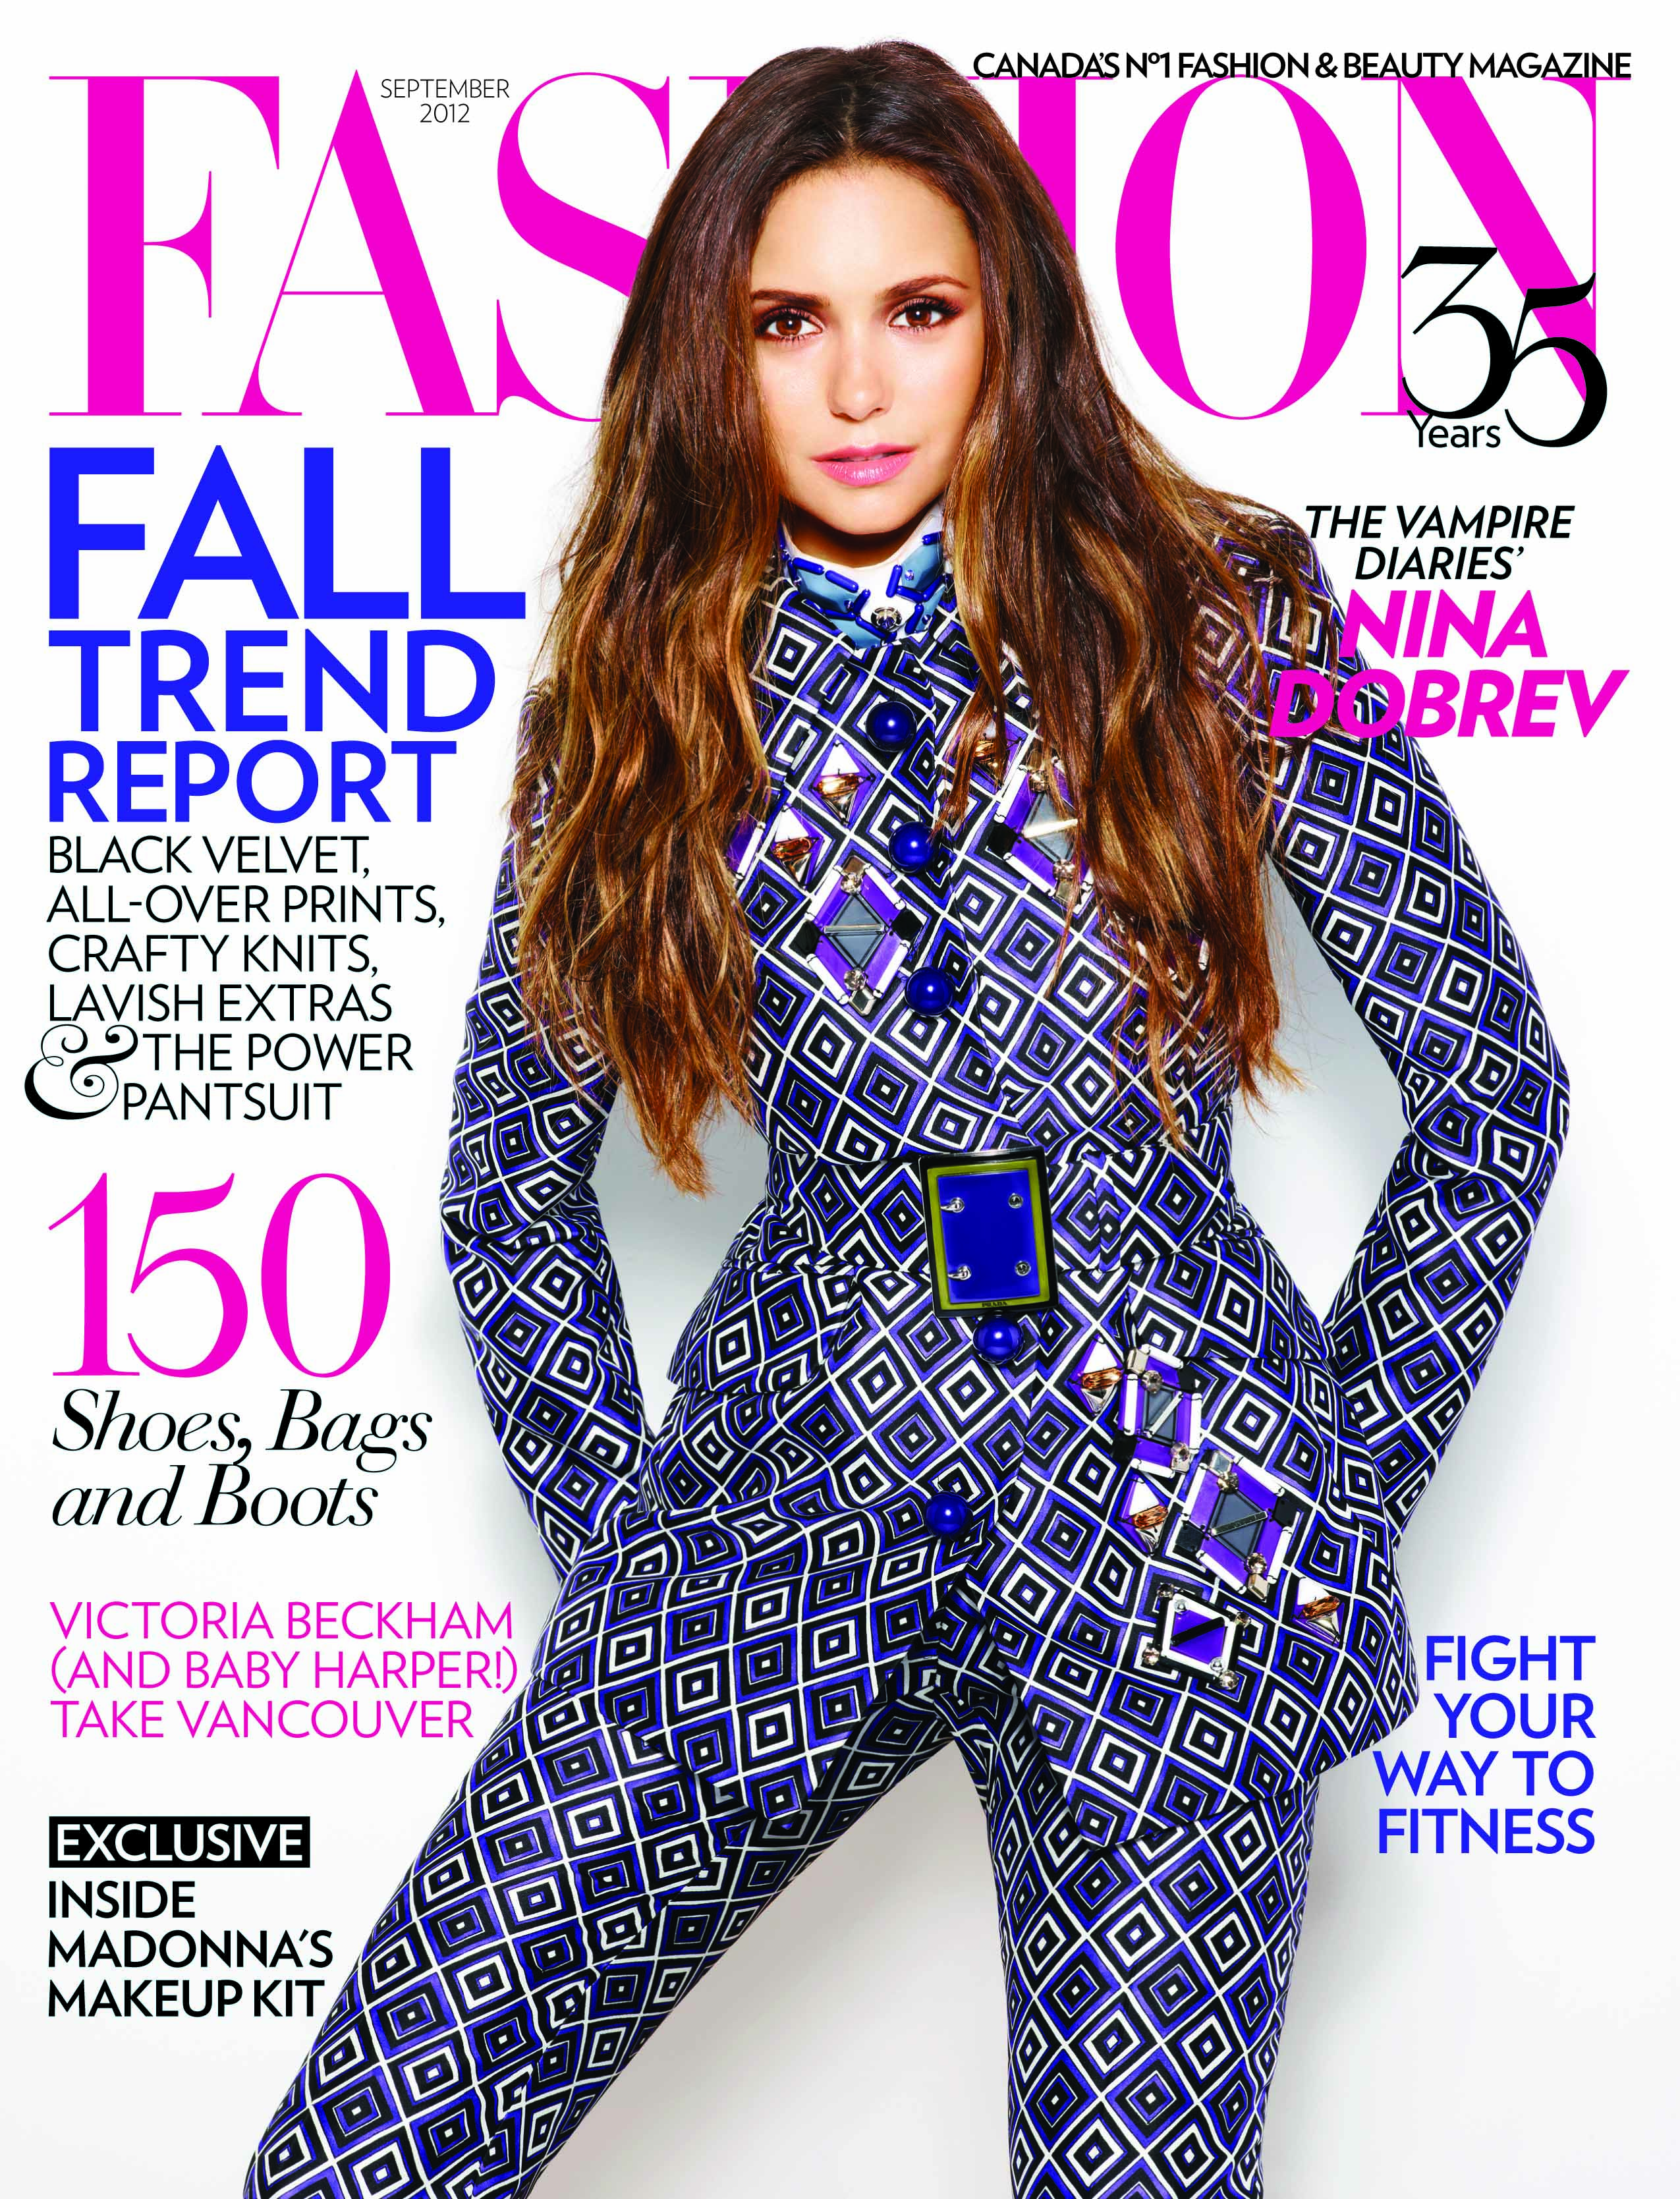 http://canadianbeauty.com/wp-content/uploads/2012/07/FASHION-Cover-September-2012.jpg